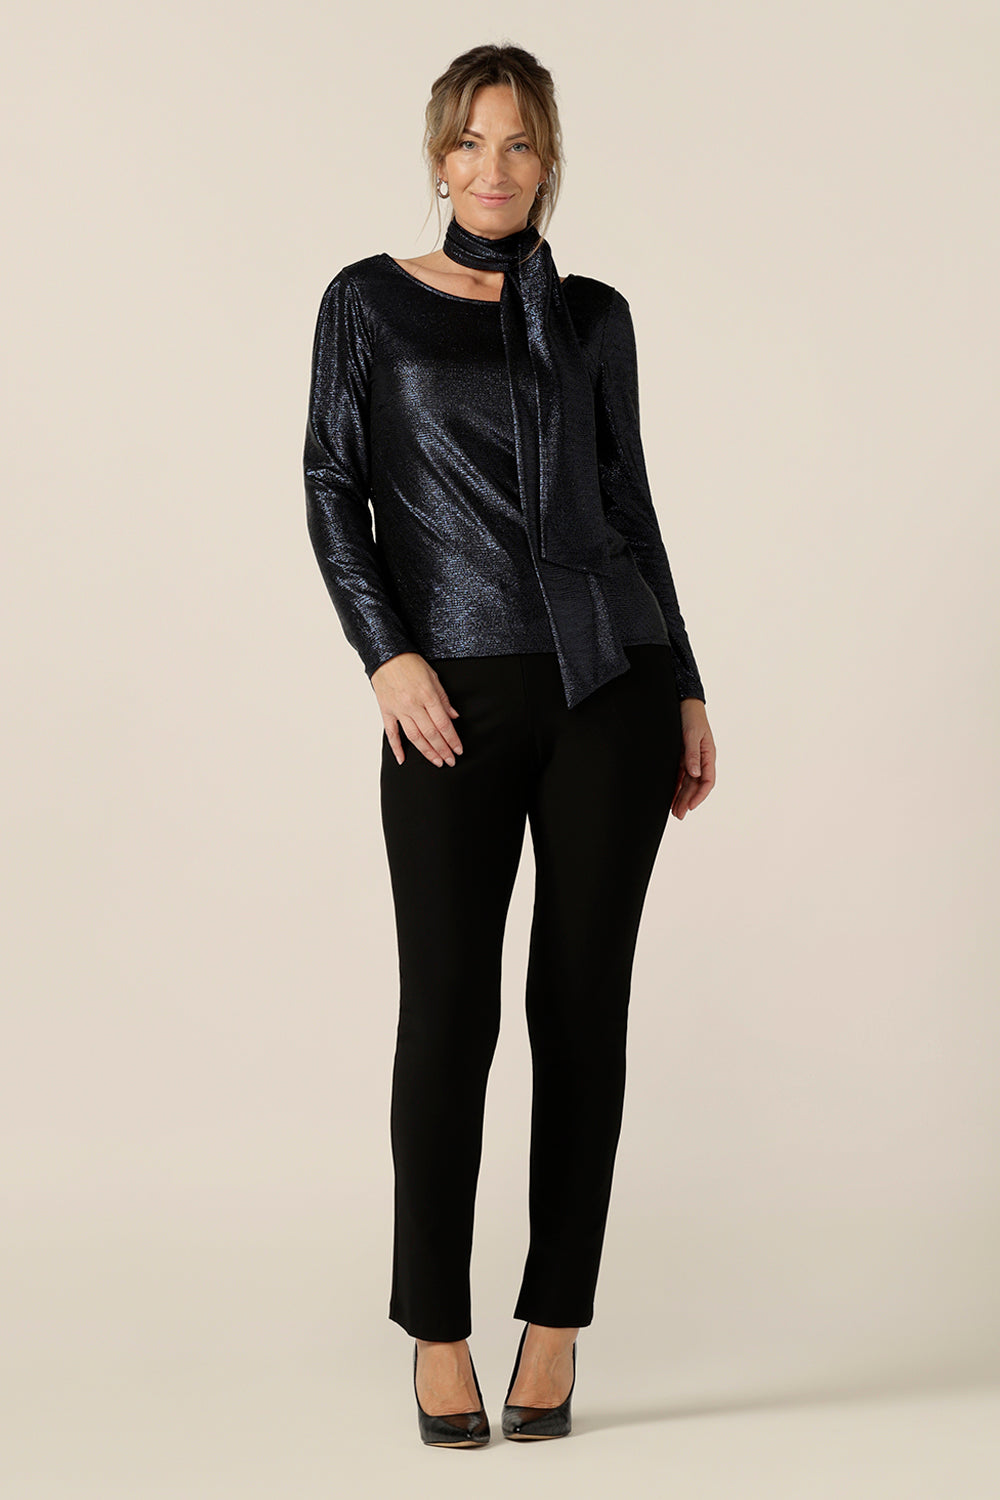 A size 10, 40-plus woman wears a shimmering midnight blue sparkly top with high scoop neck and long sleeves. Worn with slim leg, black evening pants, and shimmering blue neck tie, this is a simple and easy-to-wear, comfortable eveningwear top. Made in Australia in sizes 8 to 24.